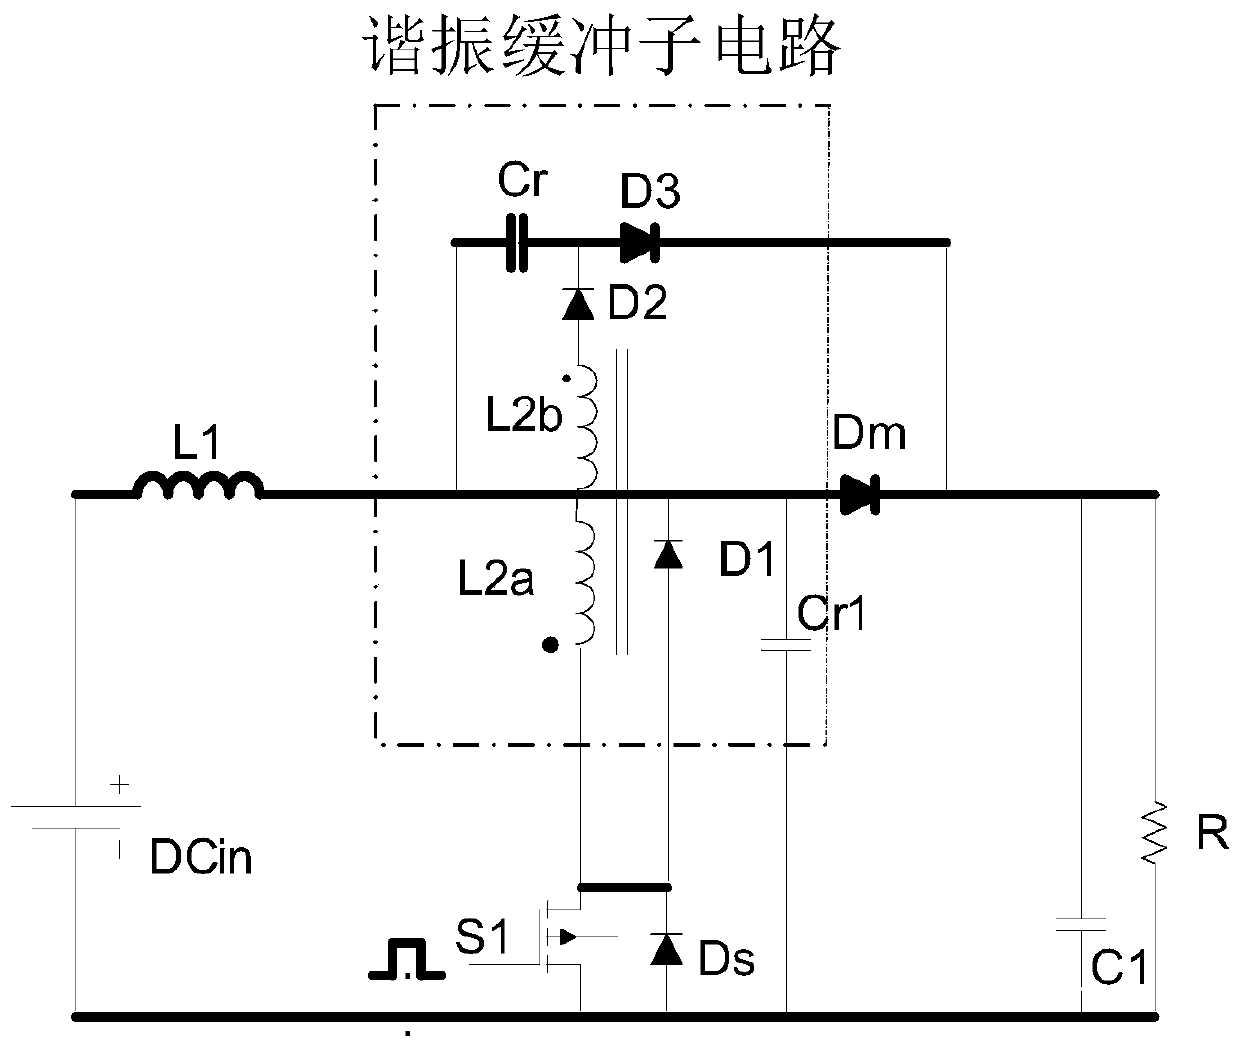 Soft switch direct current converter based on coupling inductor